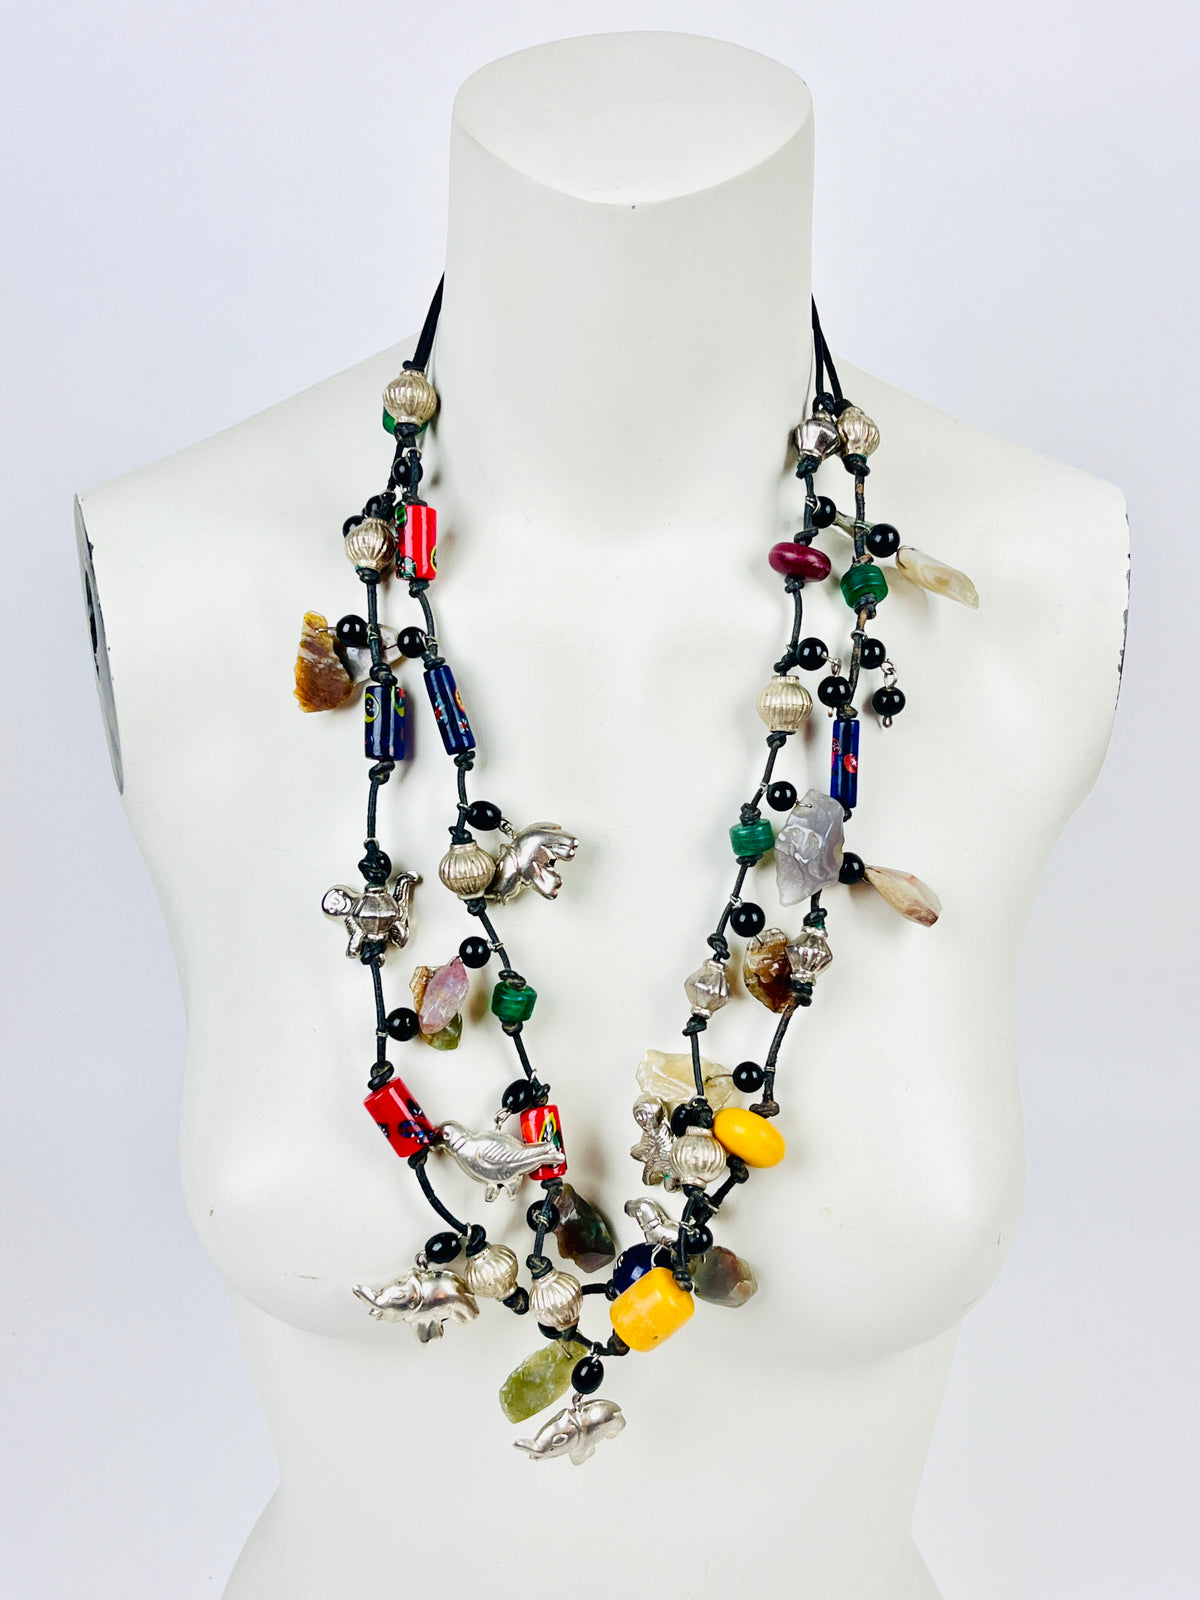 Vintage Trade Beads Necklace